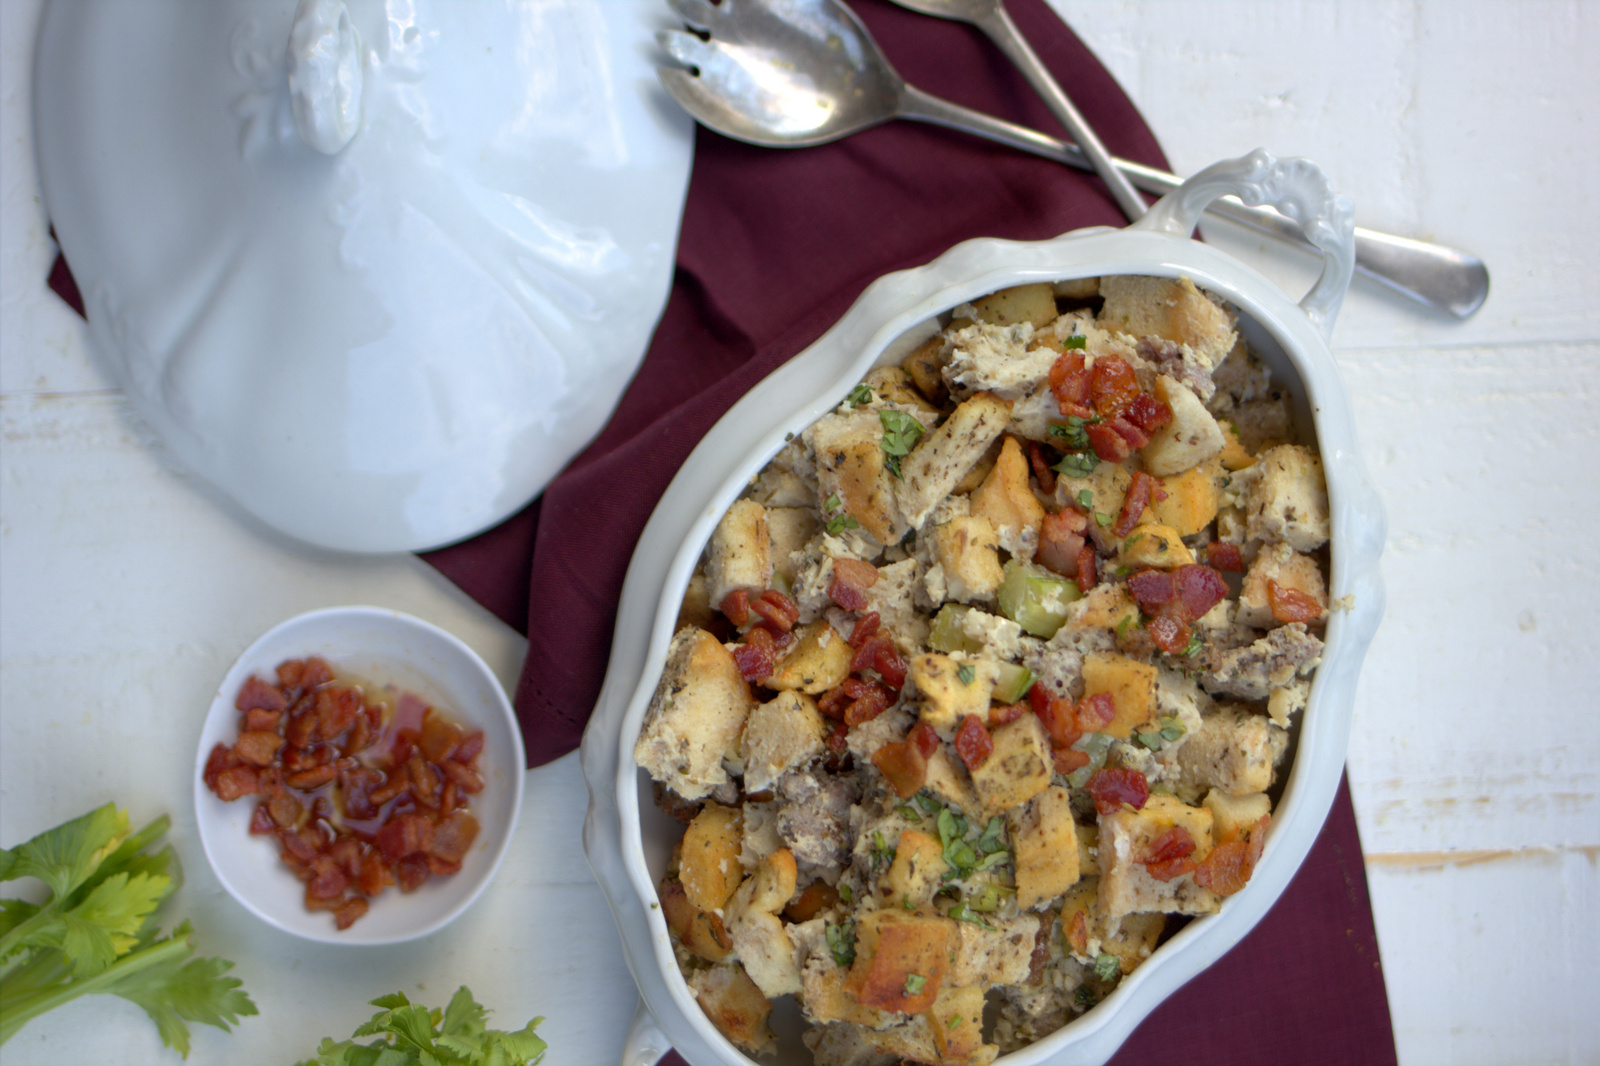 Low Carb Stuffing